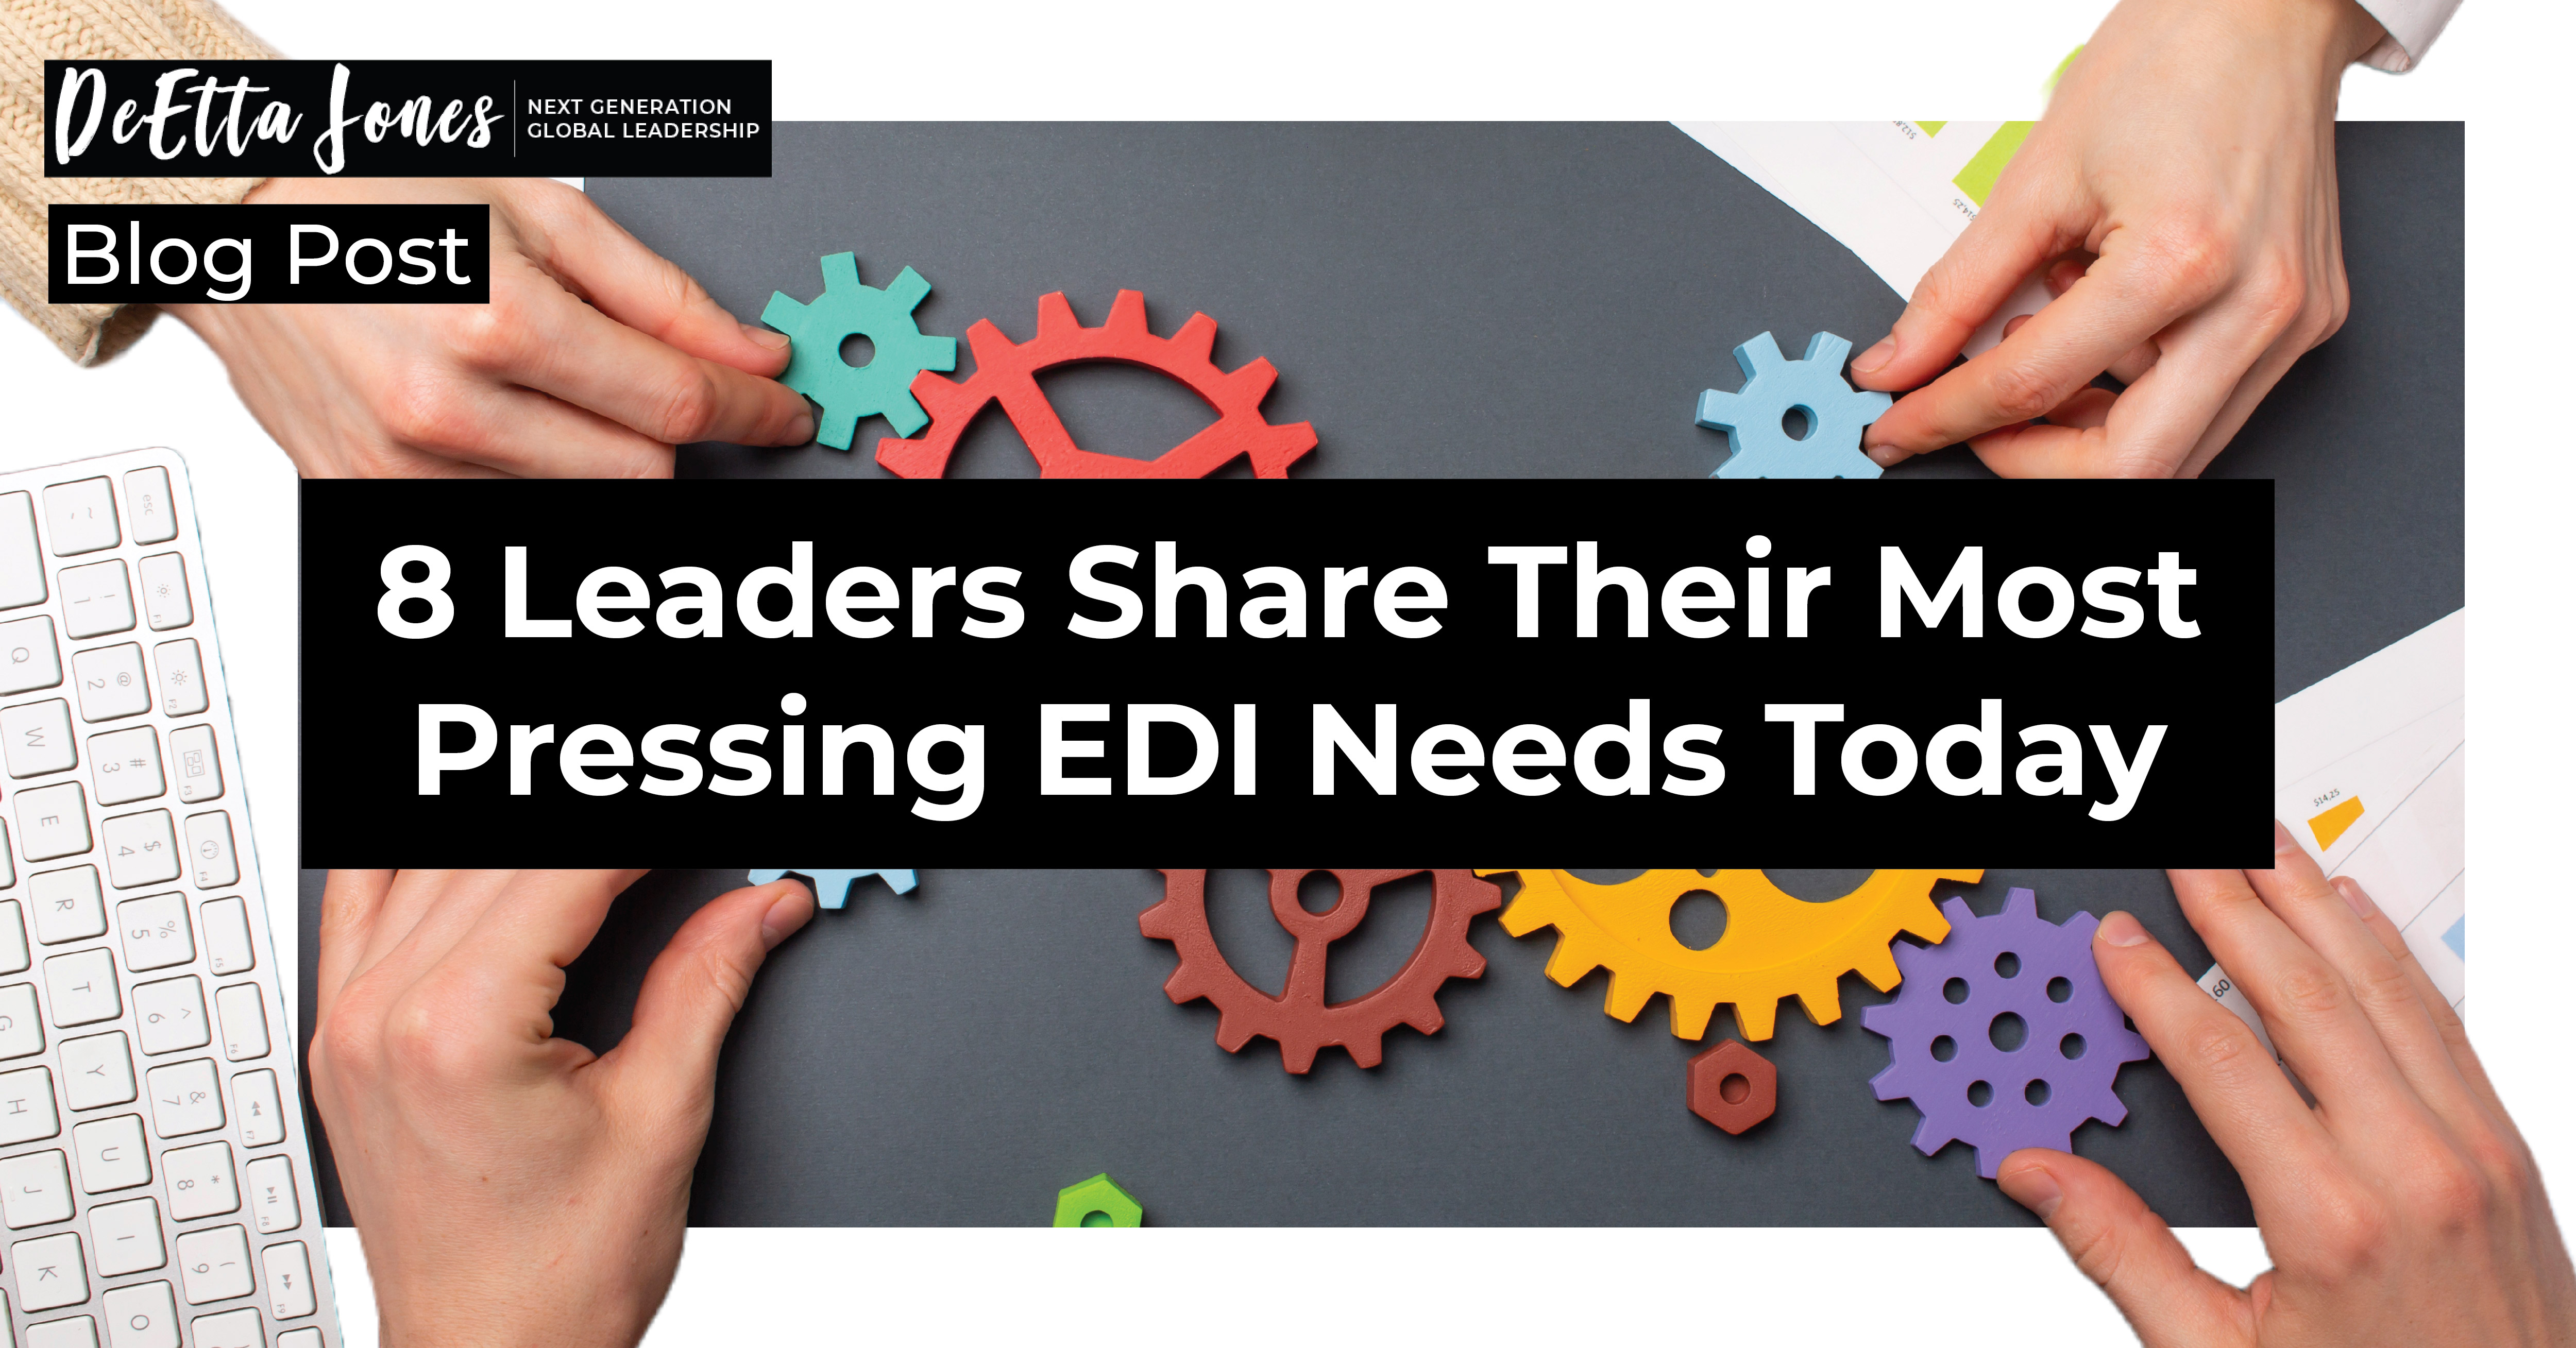 8 Leaders Share Their Most Pressing EDI Needs Today